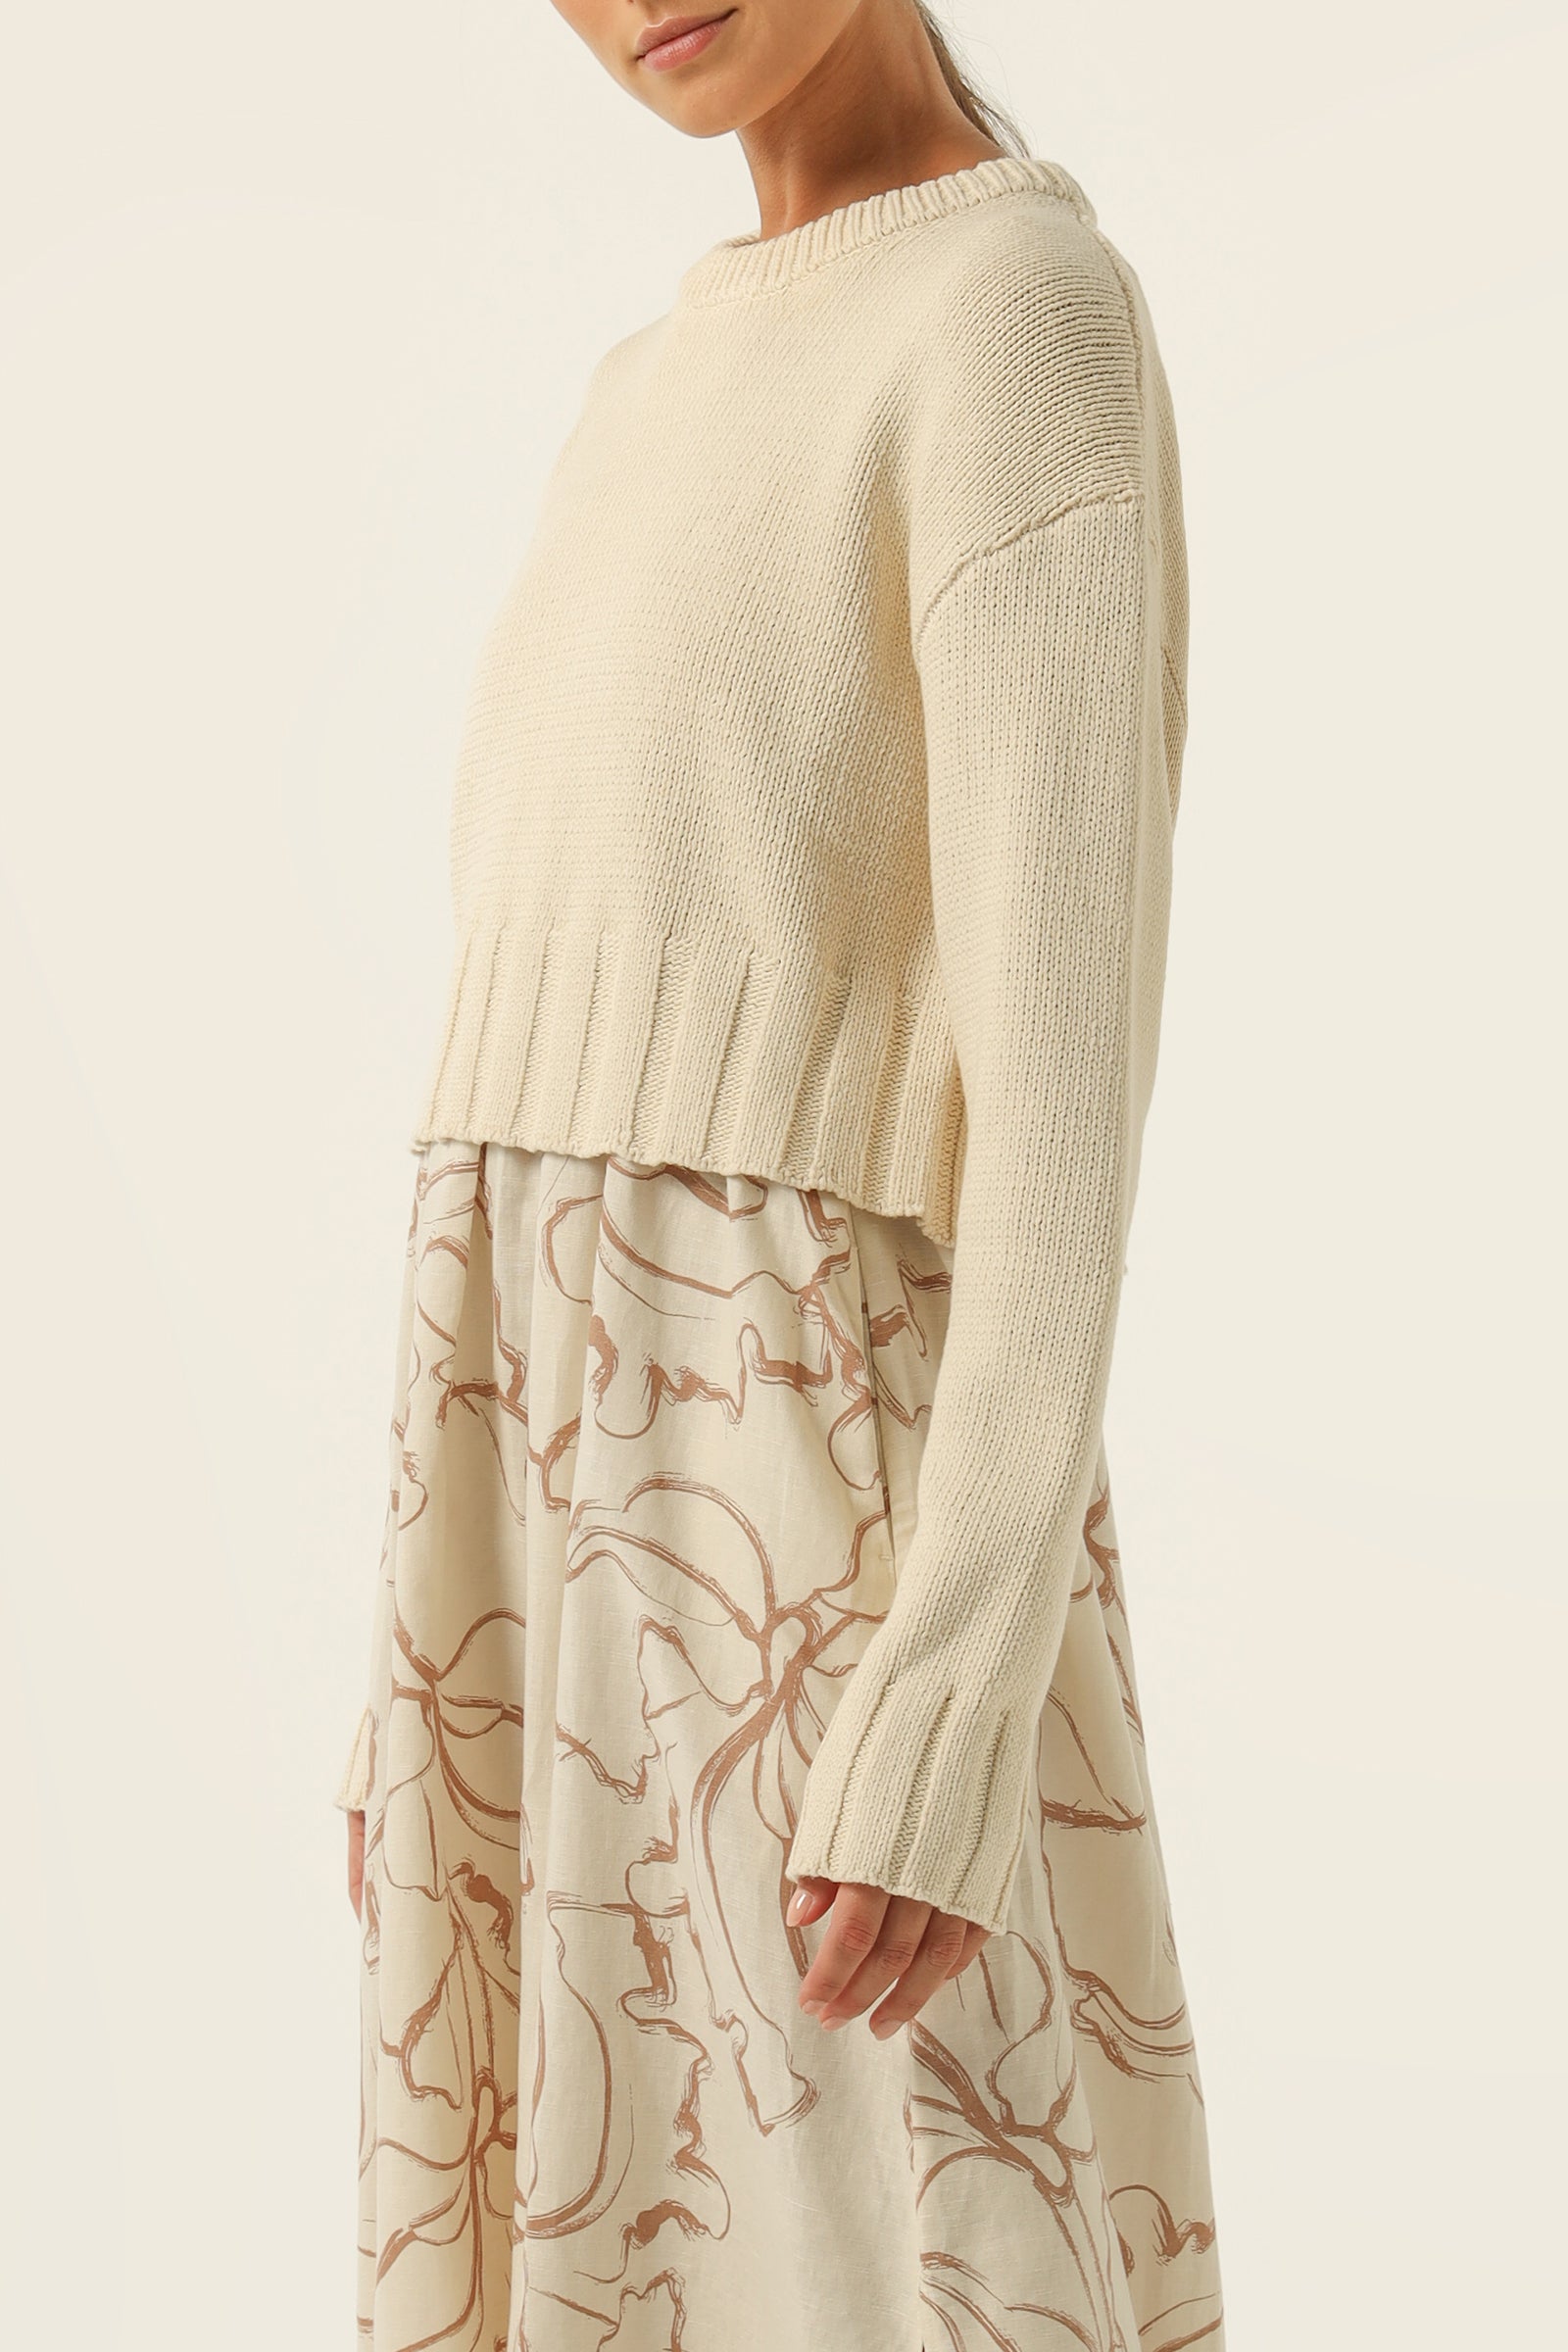 Nude Lucy Rory Knit Jumper In Nutmeg 